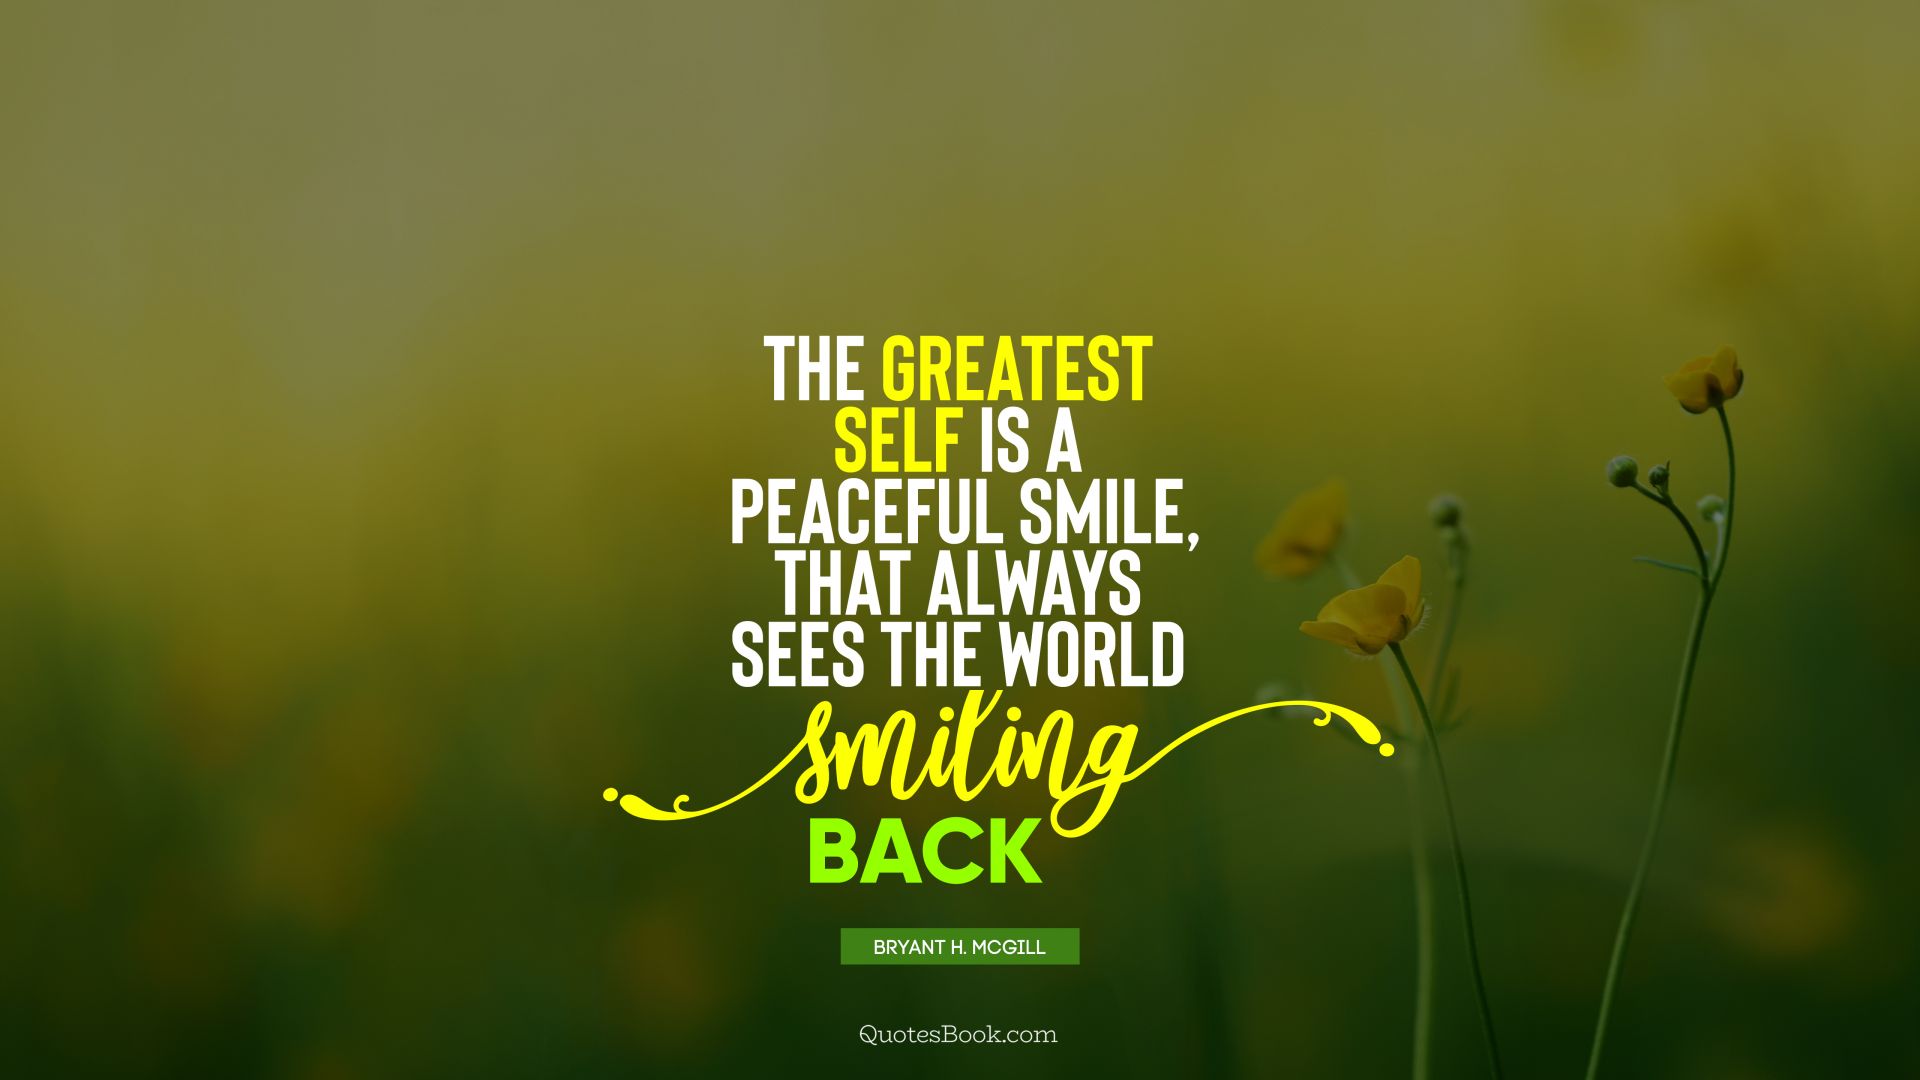 The greatest self is a peaceful smile, that always sees the world smiling back. - Quote by Bryant H. McGill